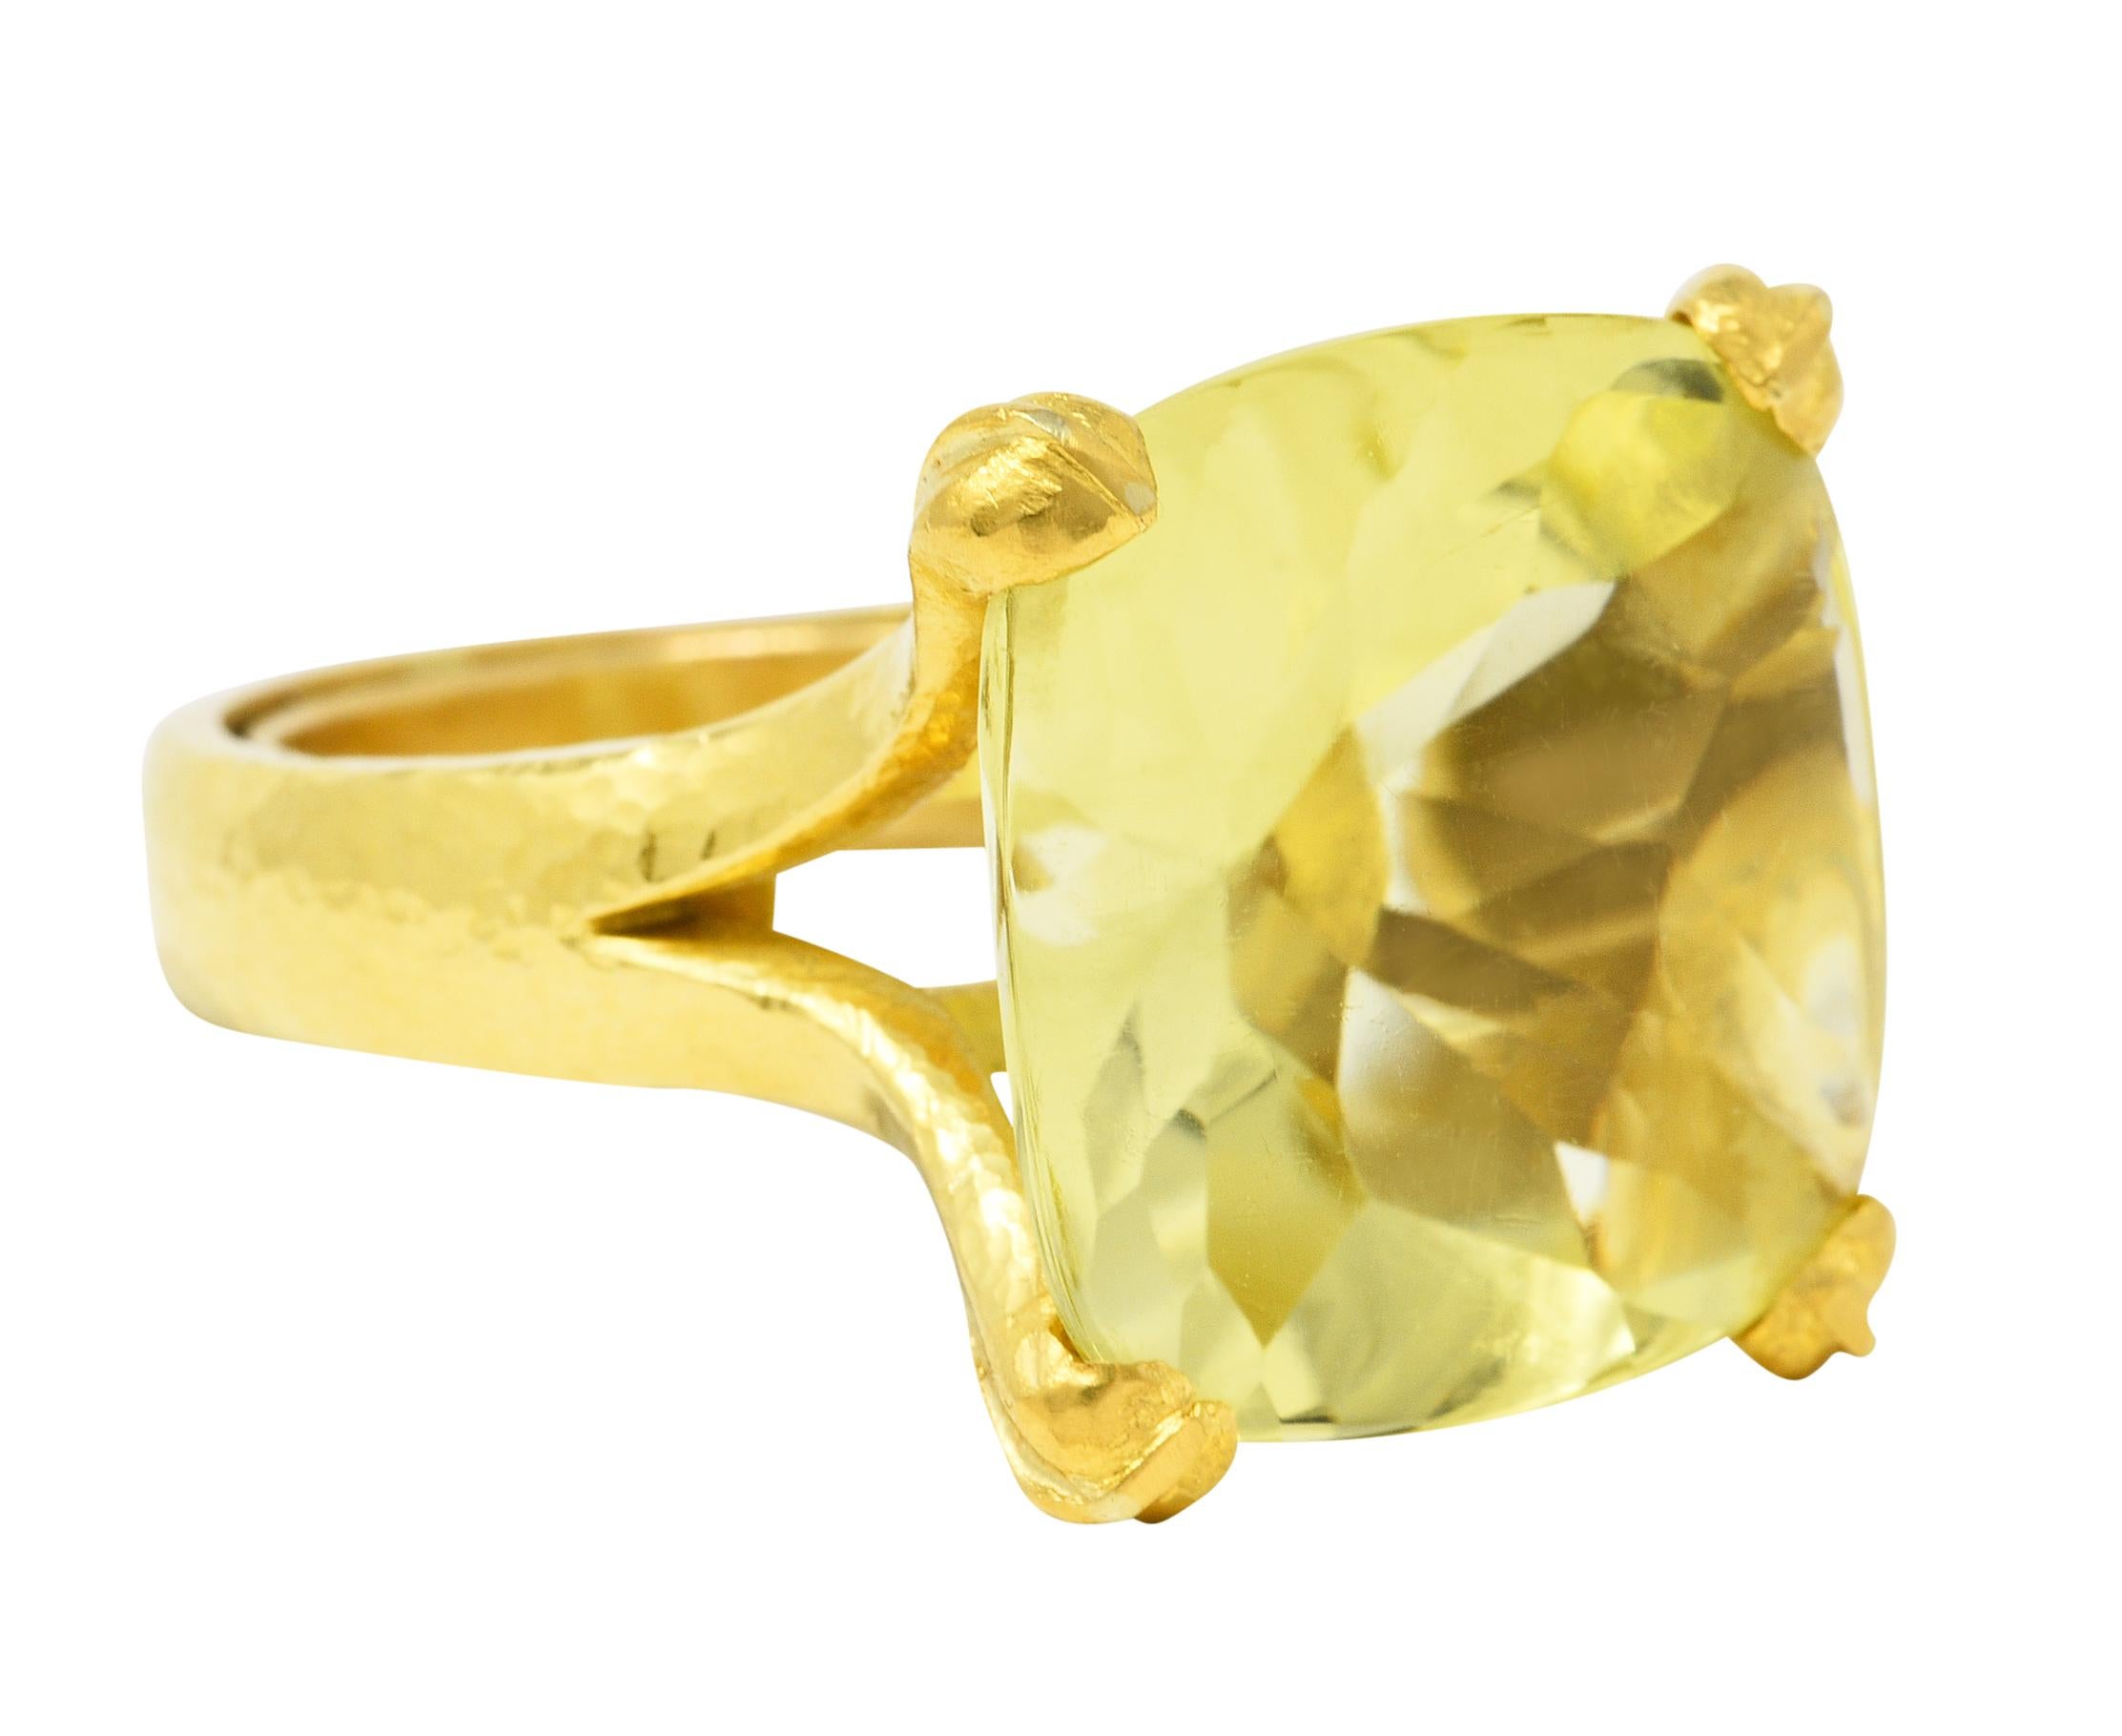 Featuring a cushion buff top of lemon quartz - measuring 19.5 x 19.5 mm

Transparent with vibrant greenish yellow color

Set with prominence by stylized prongs and flanked by dramatically split shoulders

Completed by a hammered finish